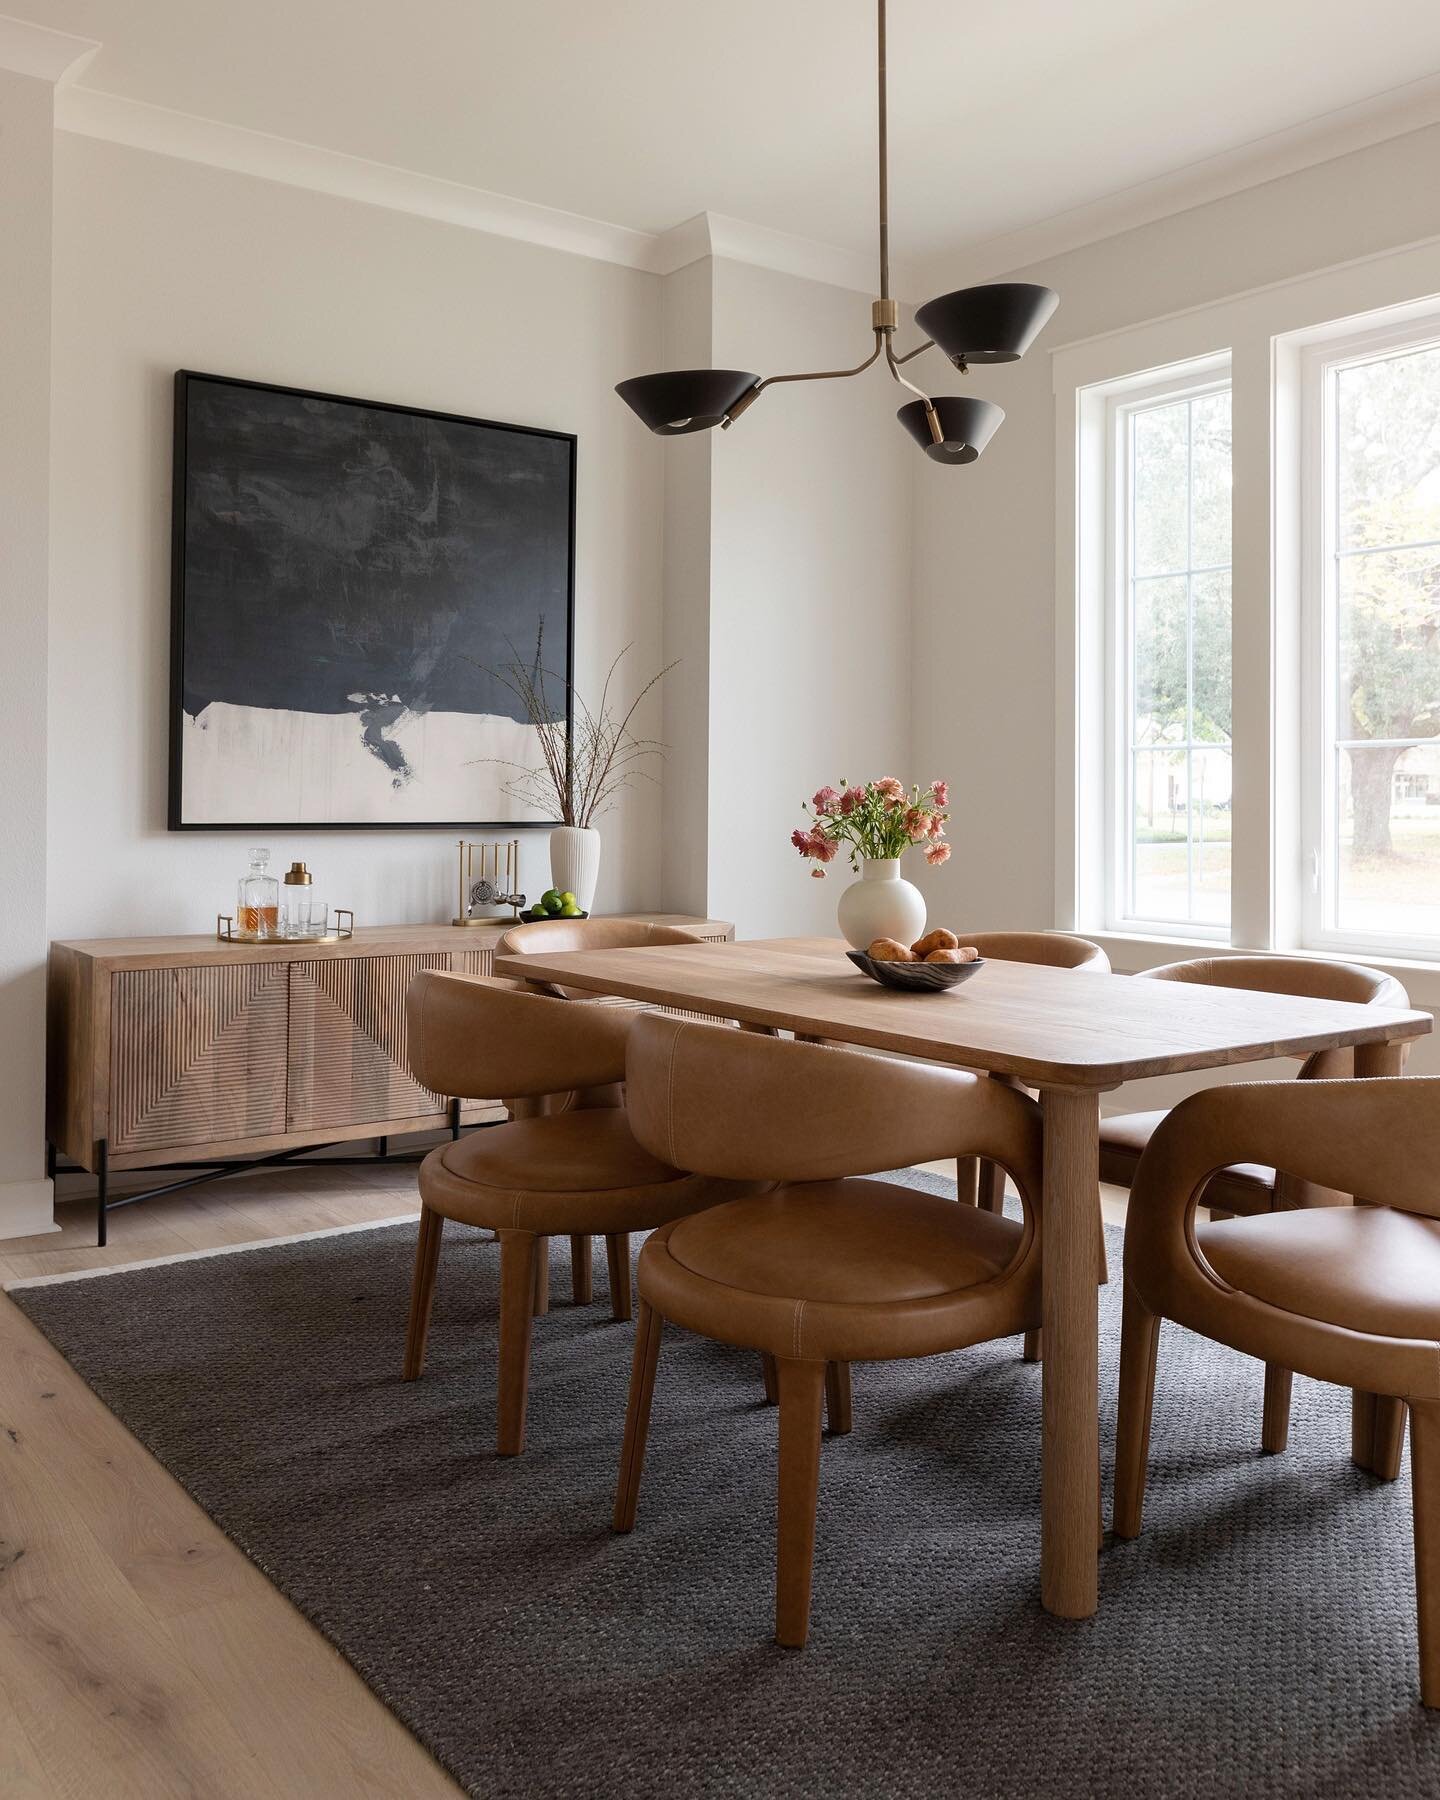 Dine in 🖤 The dining room at our Pensacola Modern New Construction incorporates natural materials for warmth, mixed metals for variety &amp; deep hues for contrast. A balanced space made for gathering. Designed by Corio Design House. 

Photography b